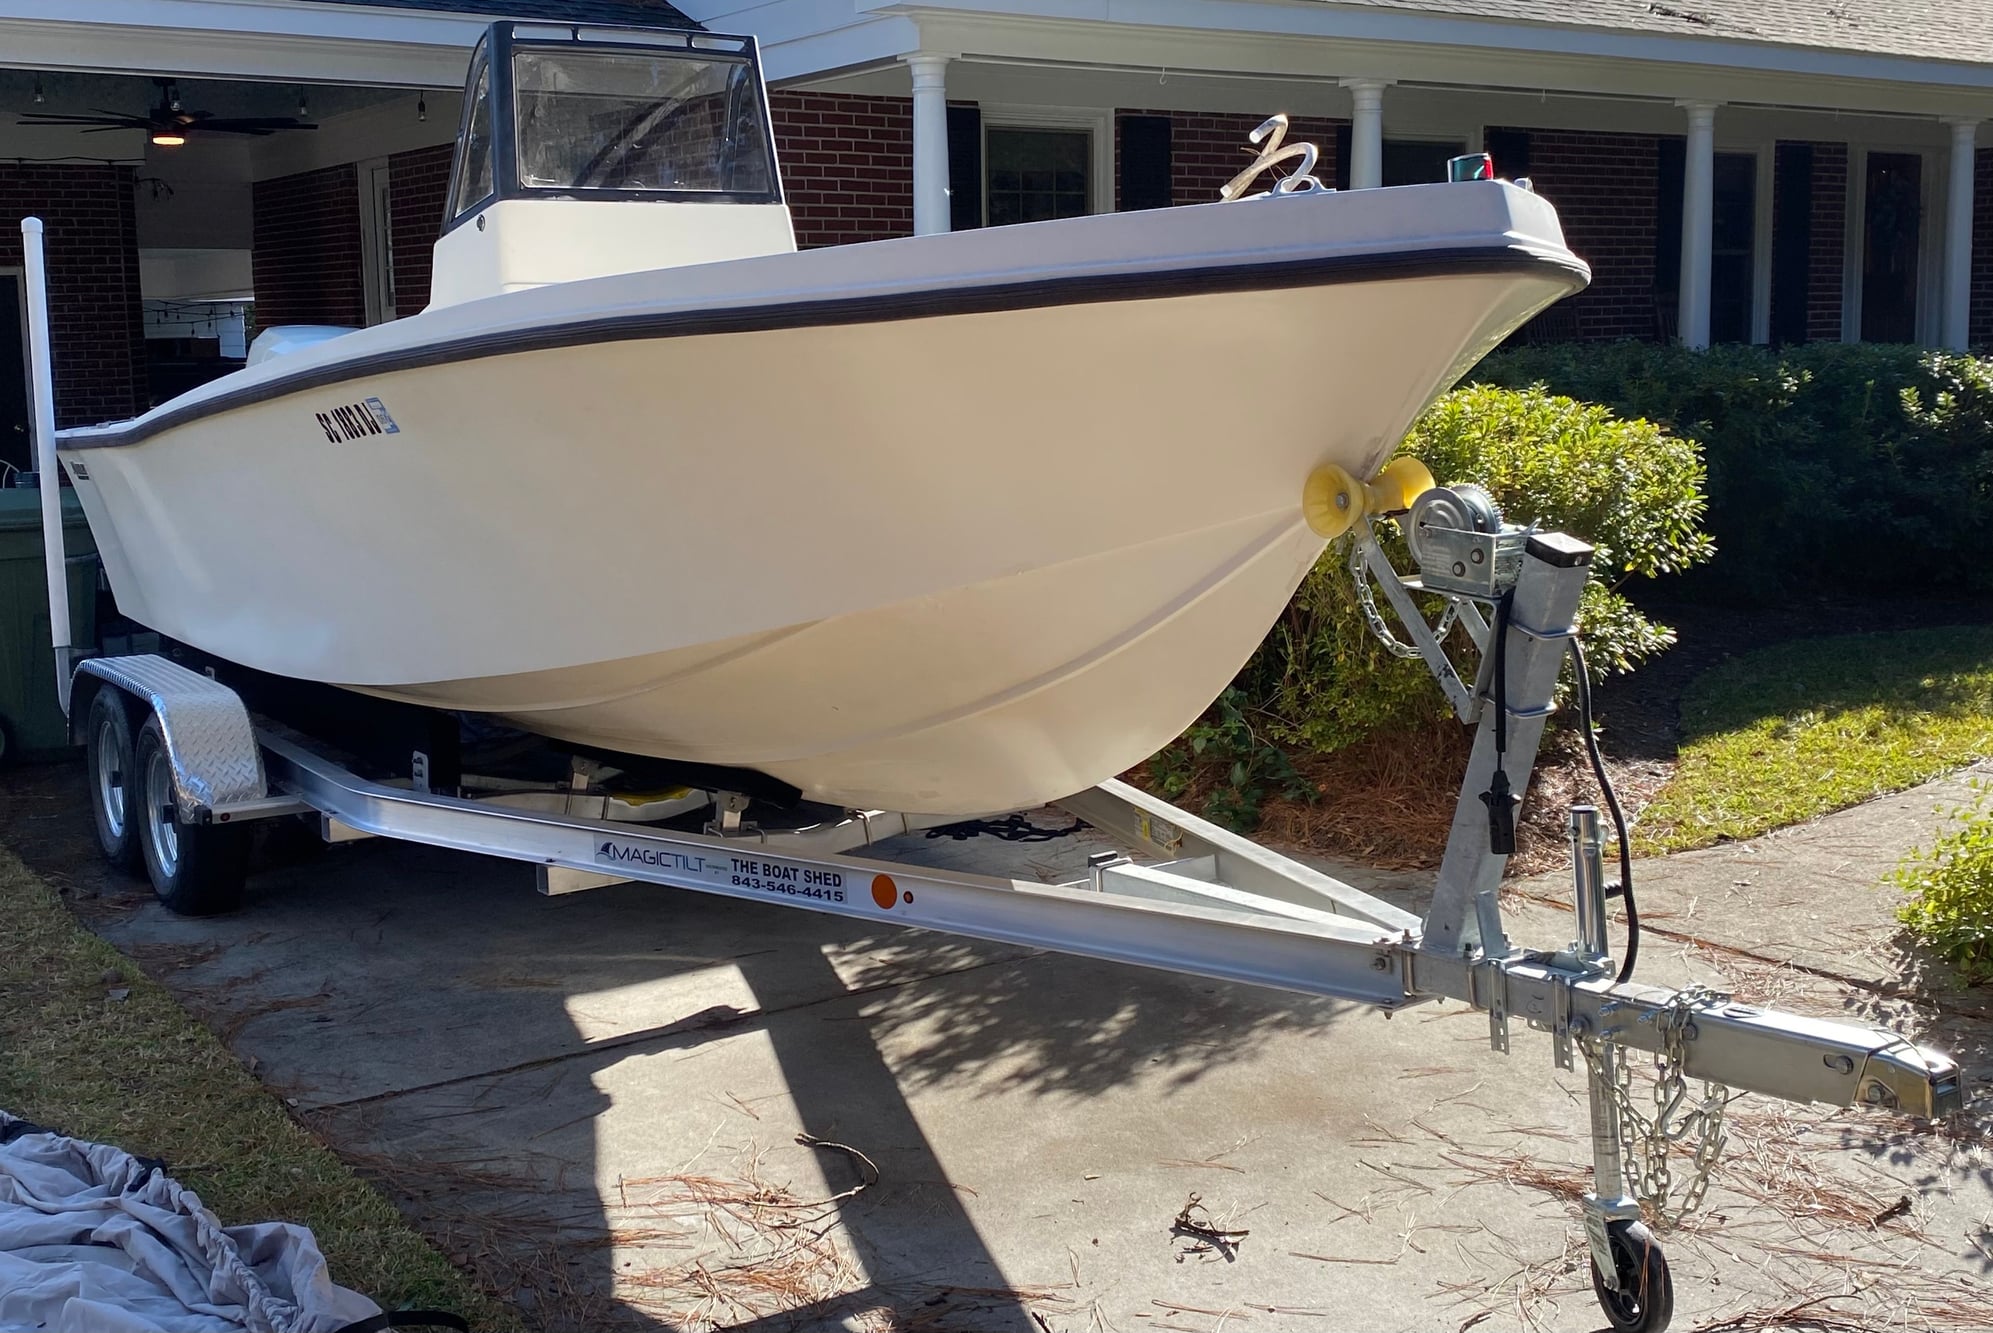 1988 Mako 211 For Sale - The Hull Truth - Boating and Fishing Forum